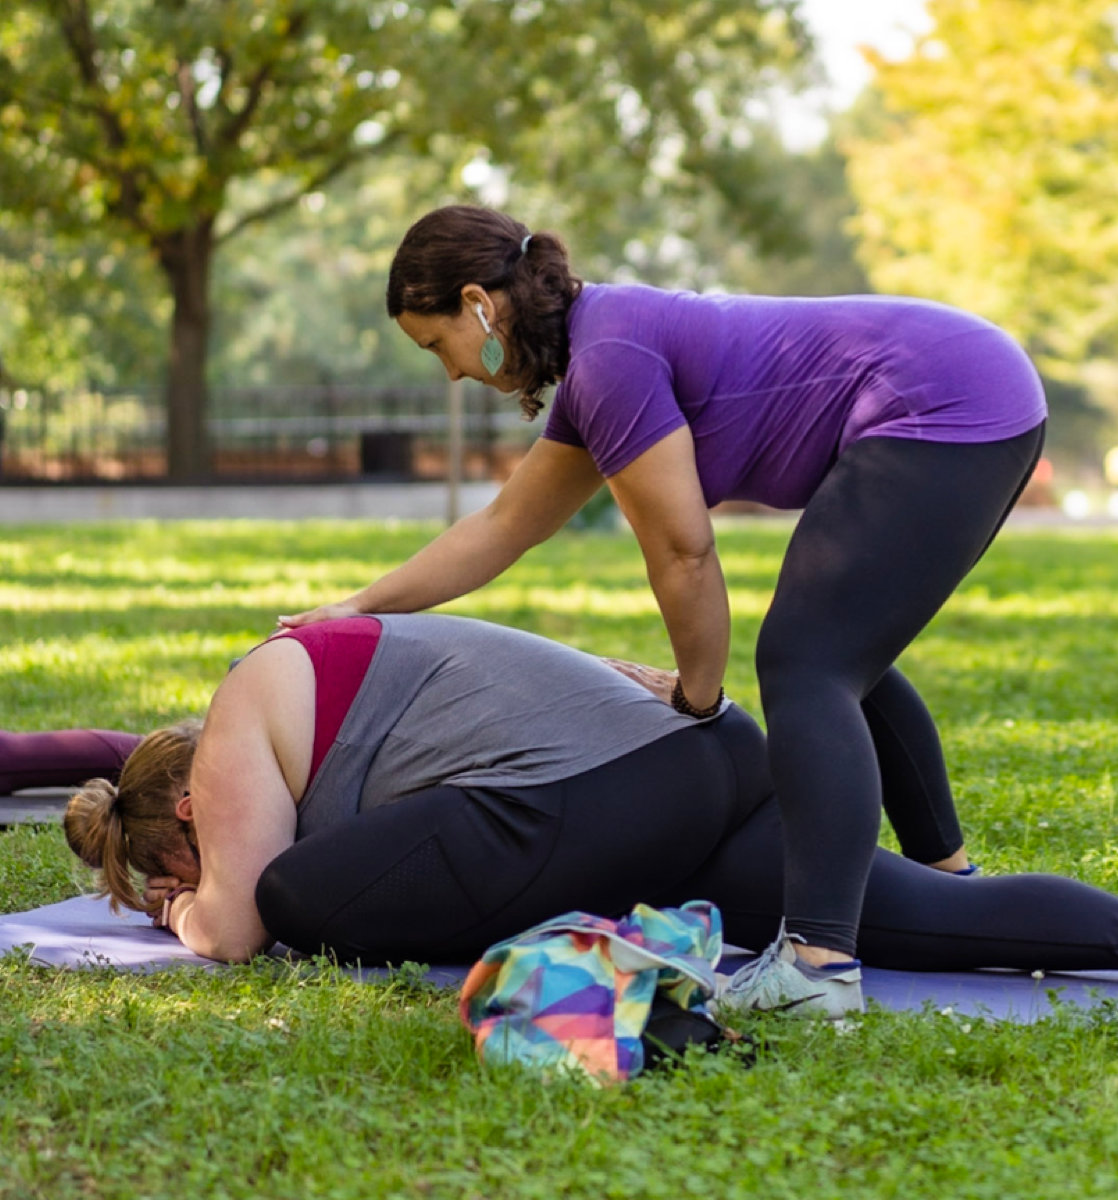 Private yoga with Rachel Morrison of Mindful Movement DC